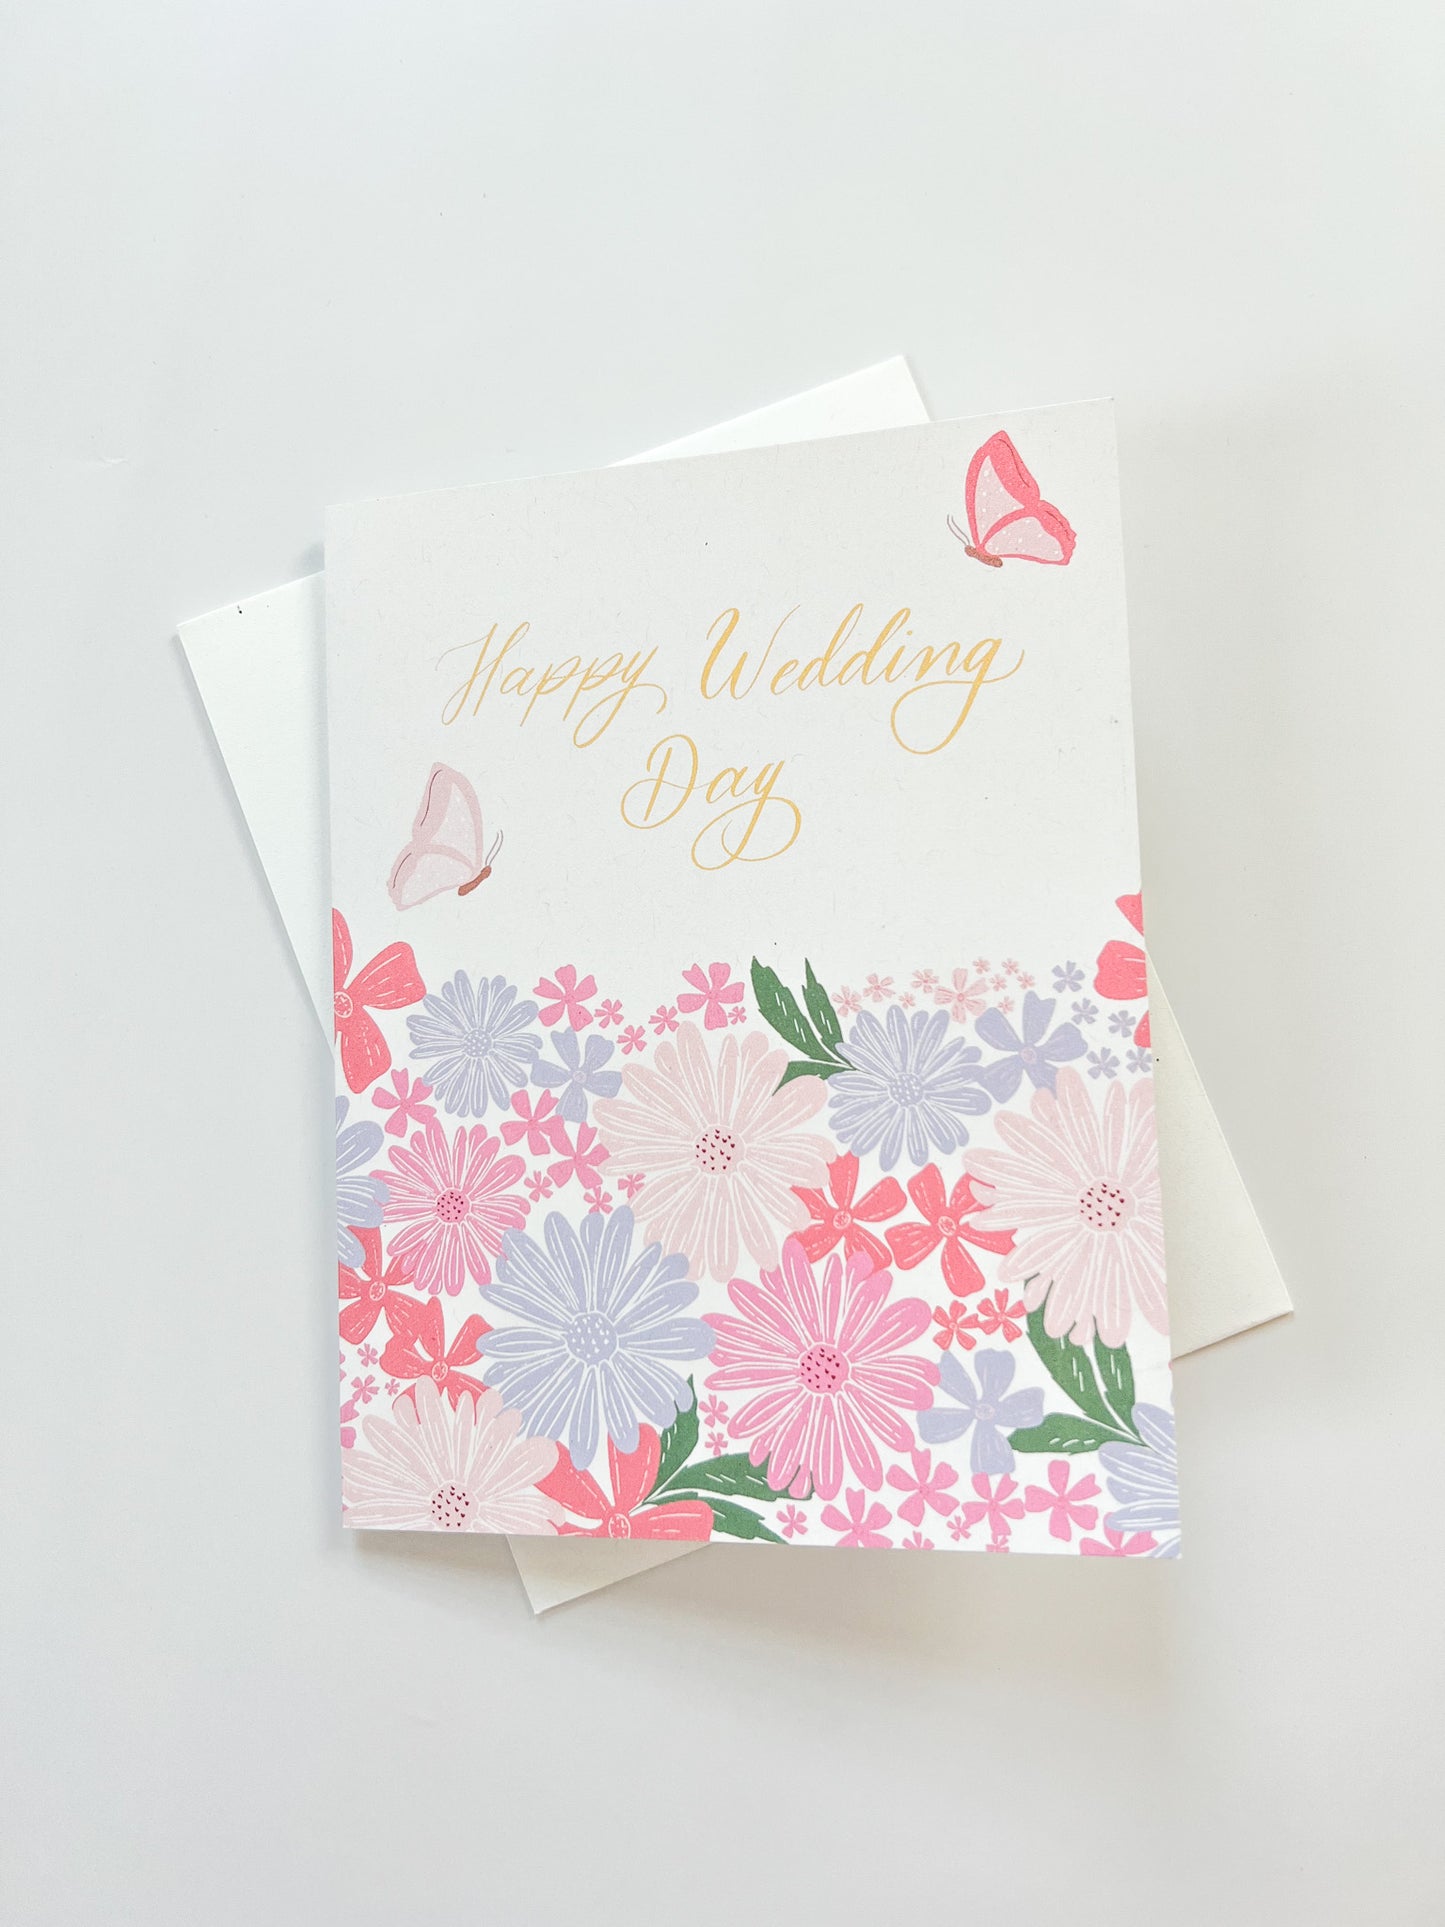 elegant wedding day card with flowers and butterflies